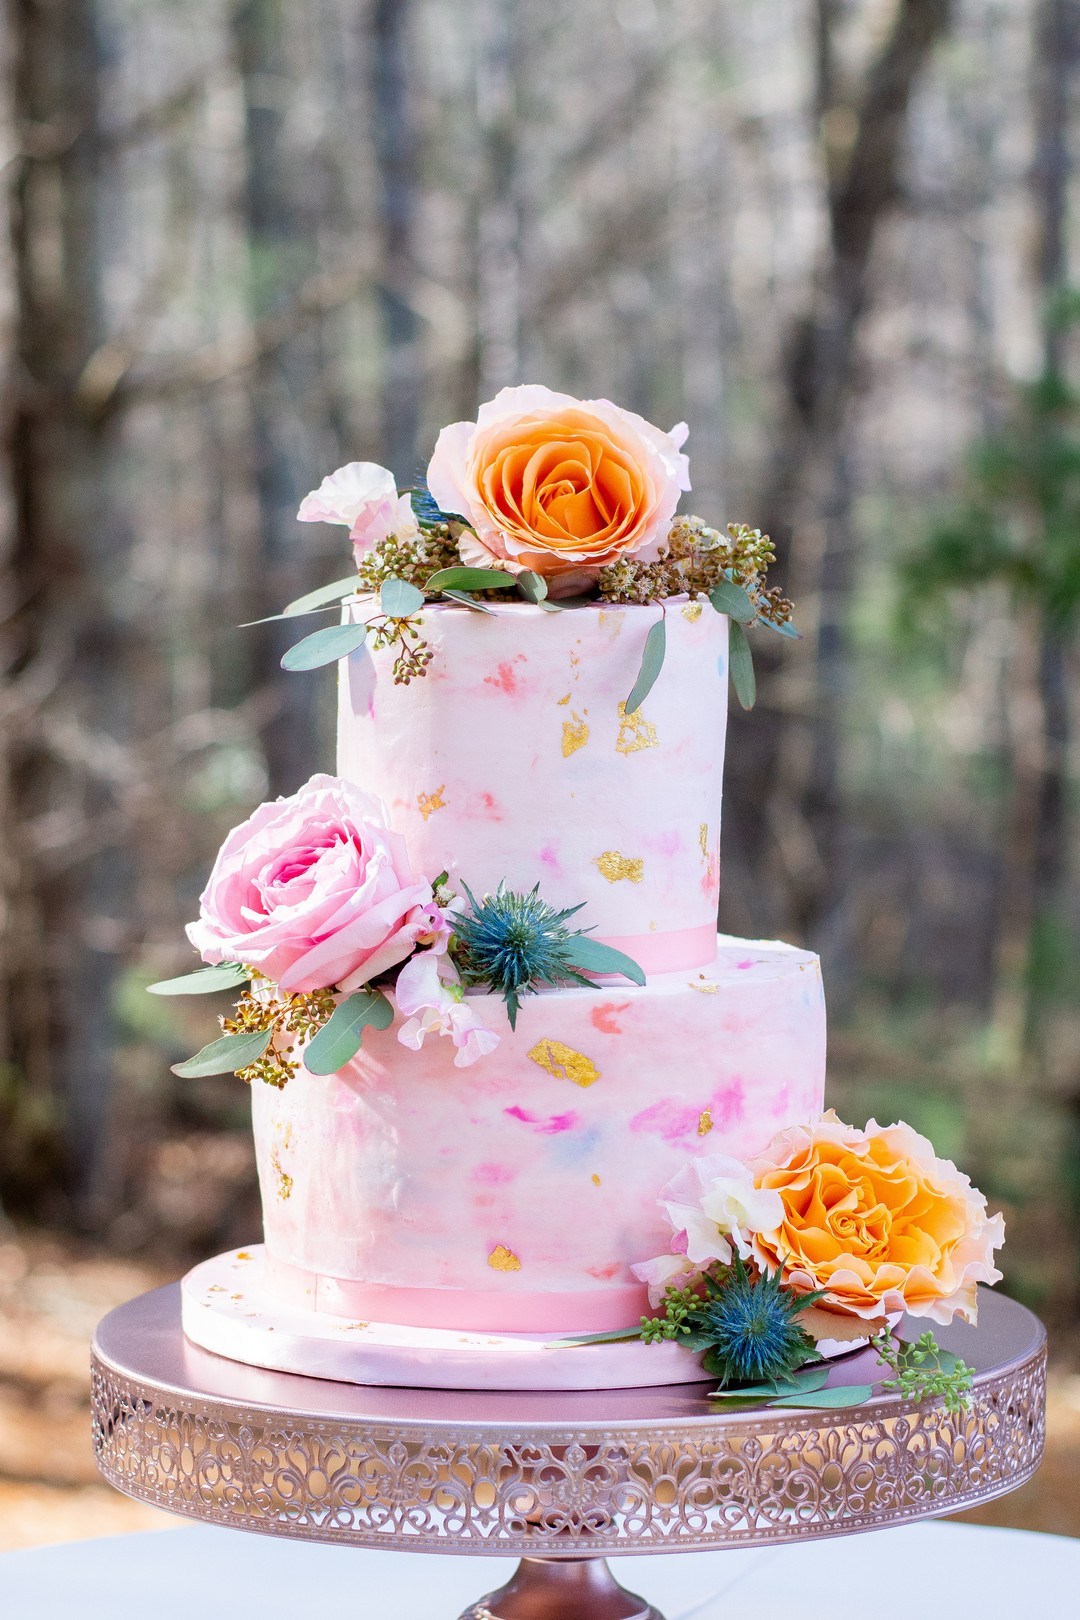 The wedding cake was a pink one, with watercolor brushstrokes in bold colors and gold leaf plus bright blooms and thistles